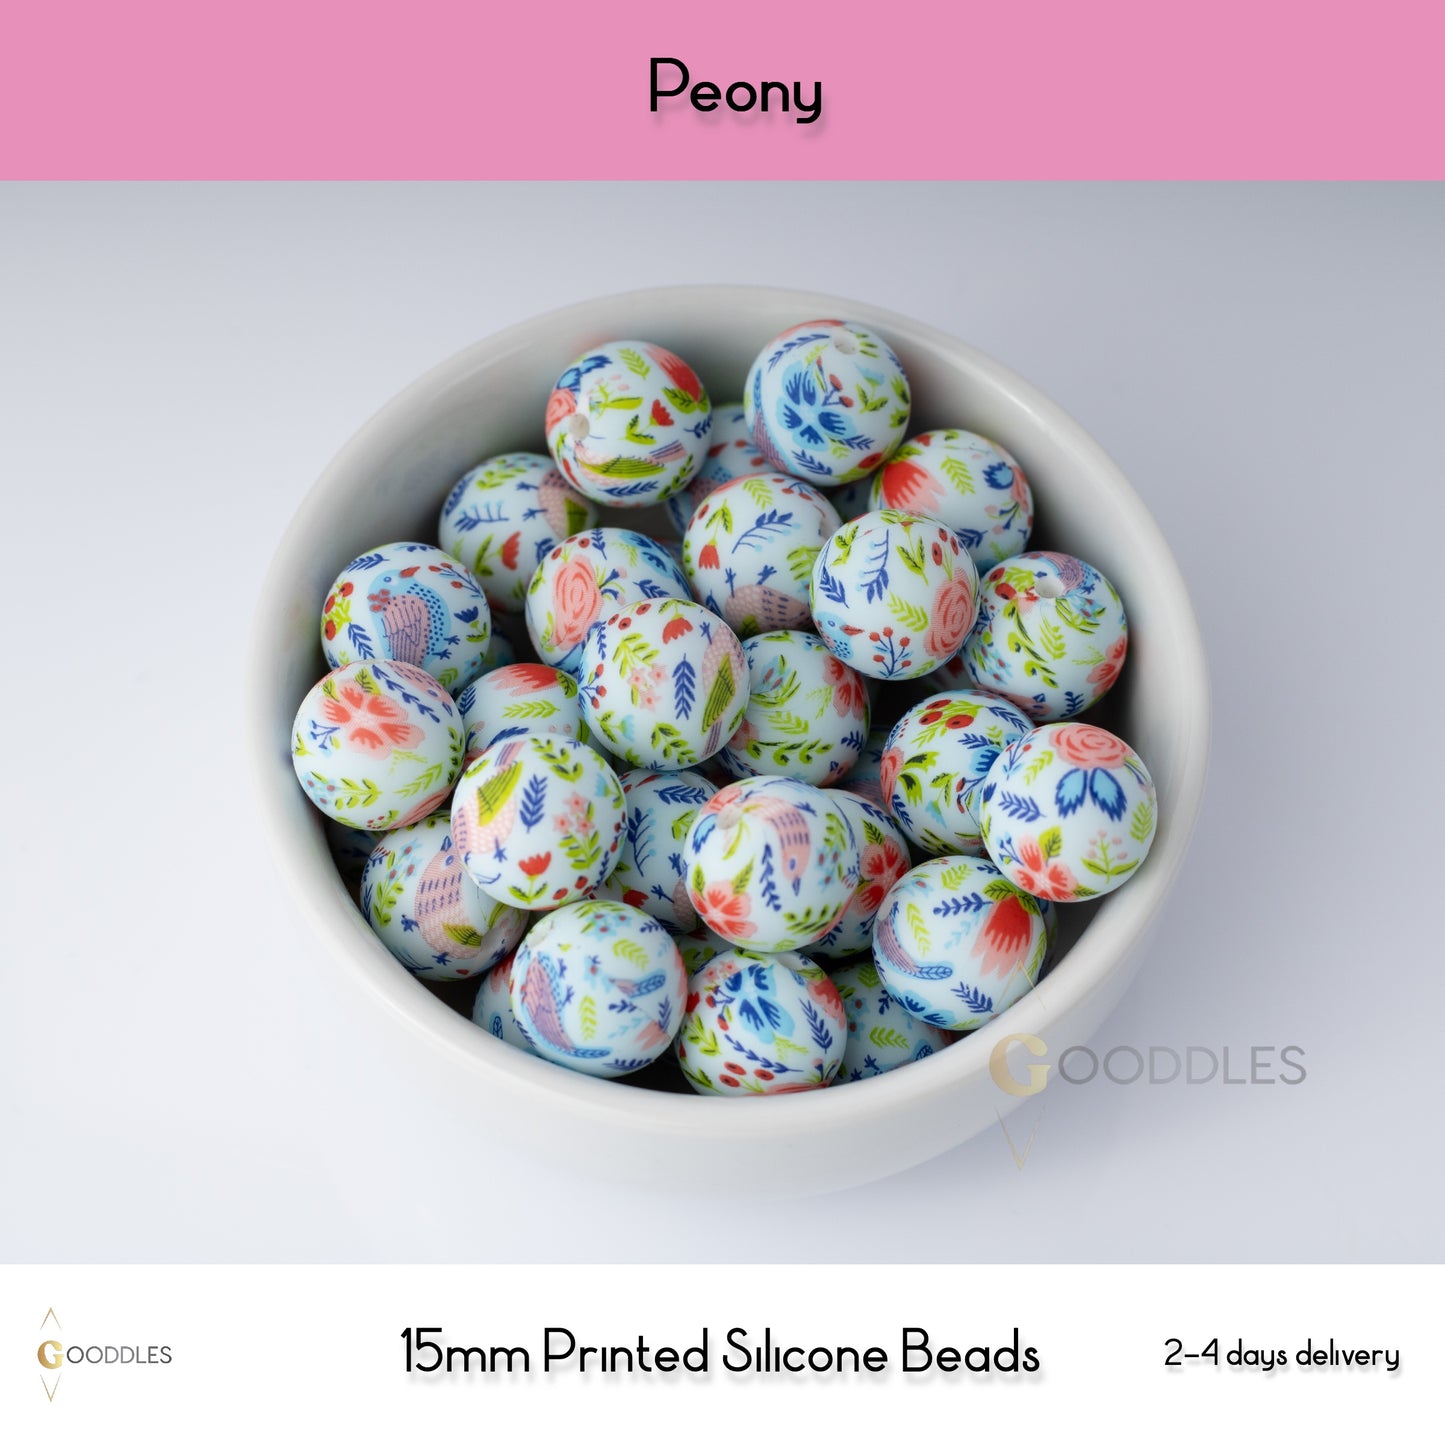 5pcs, Peony Silicone Beads Printed Round Silicone Beads